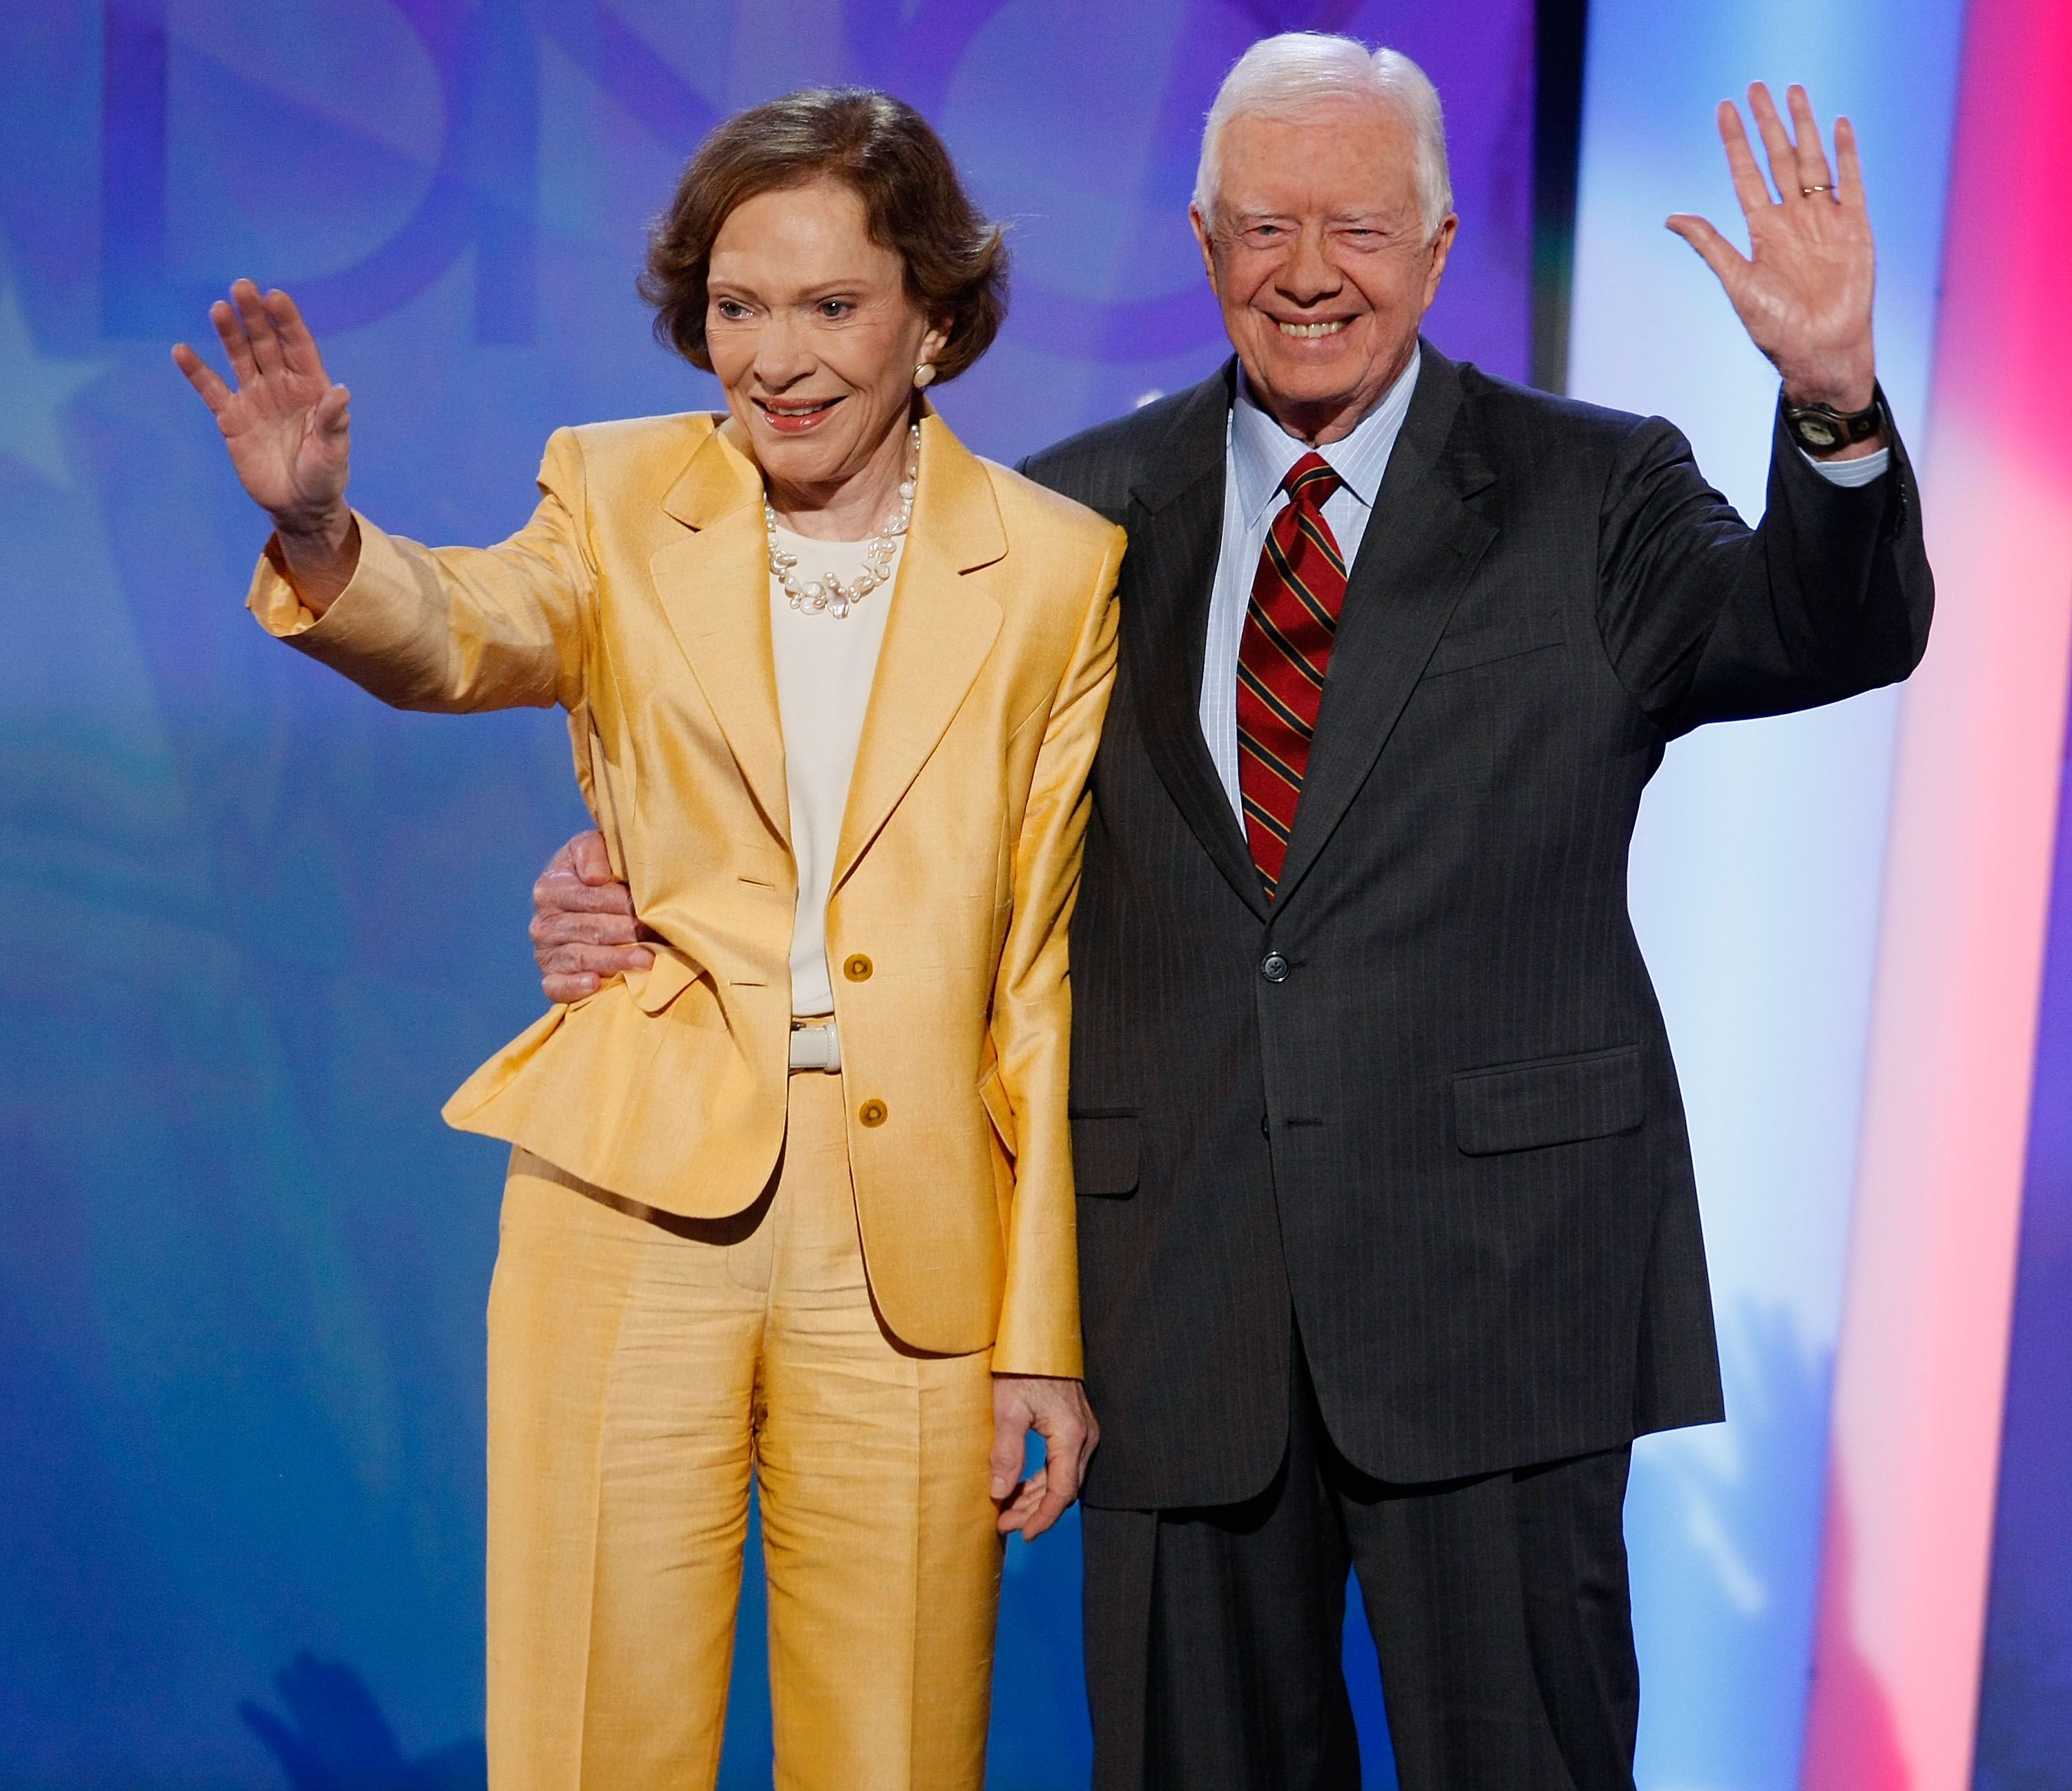 Jimmy and Rosalynn Carter during day one of the Democratic National Convention (DNC) at the Pepsi Center on August 25, 2008, in Denver, Colorado | Source: Getty Images